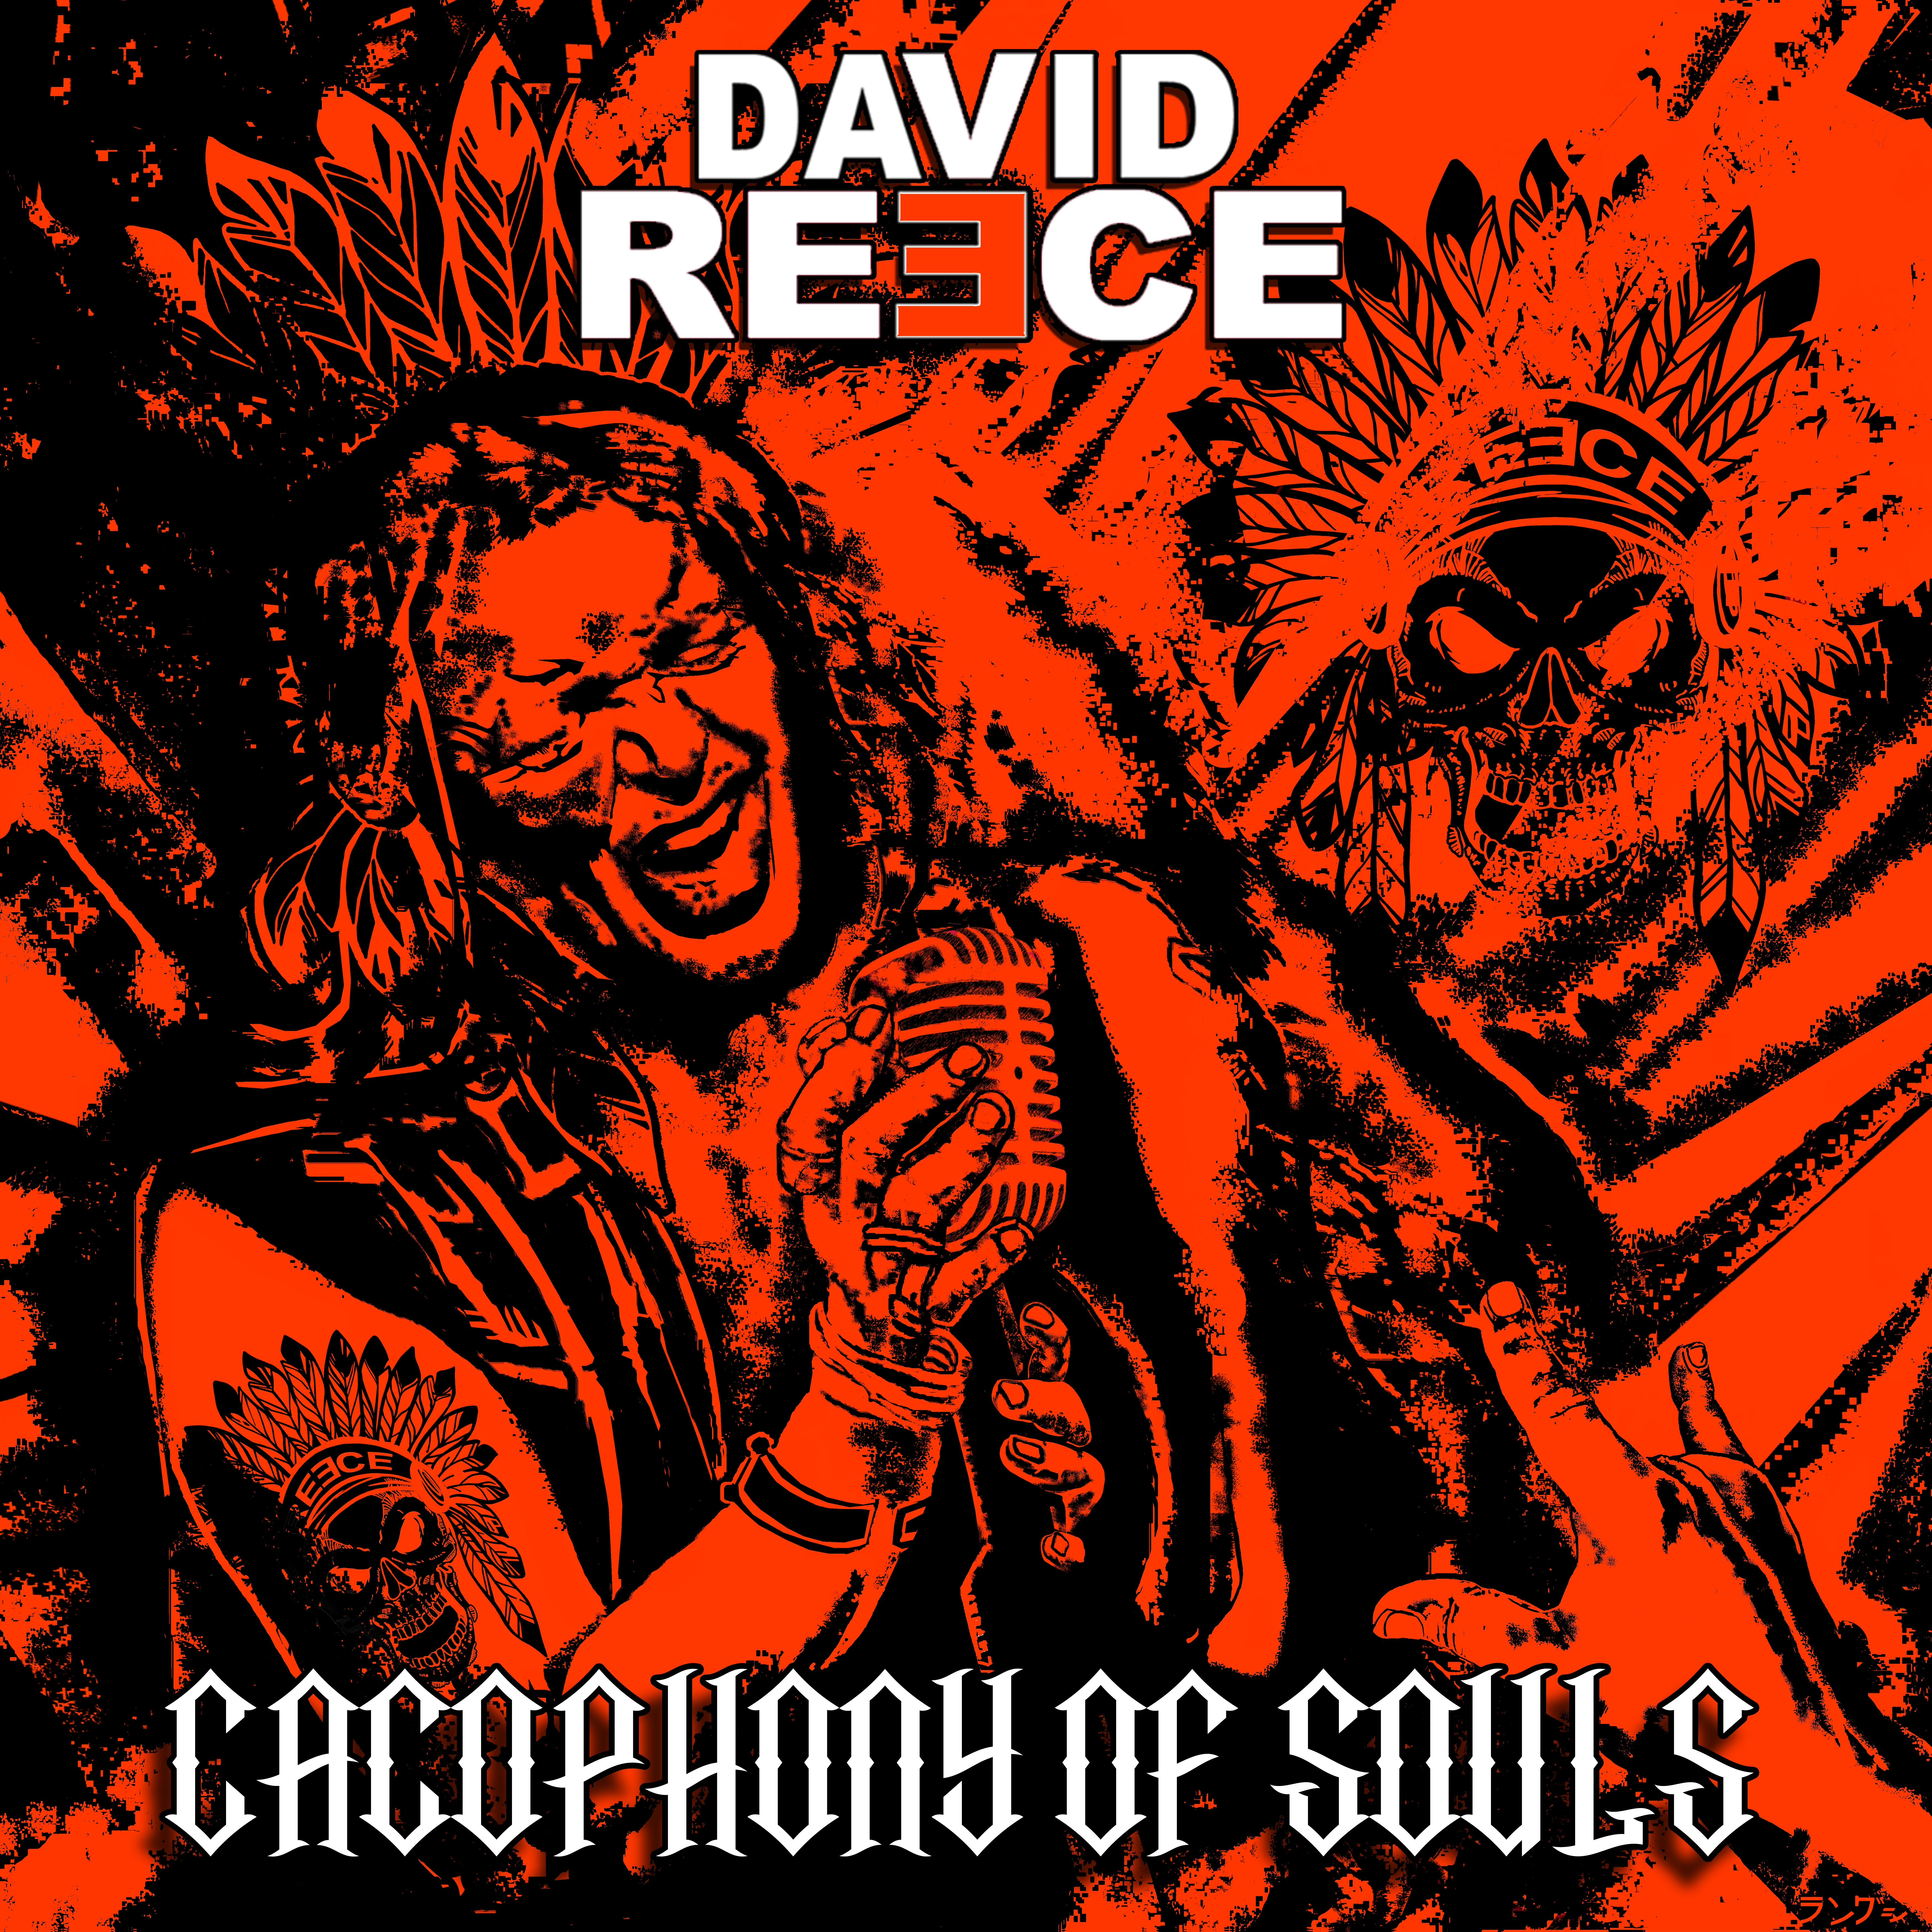 Review: REECE Cacophony Of Souls